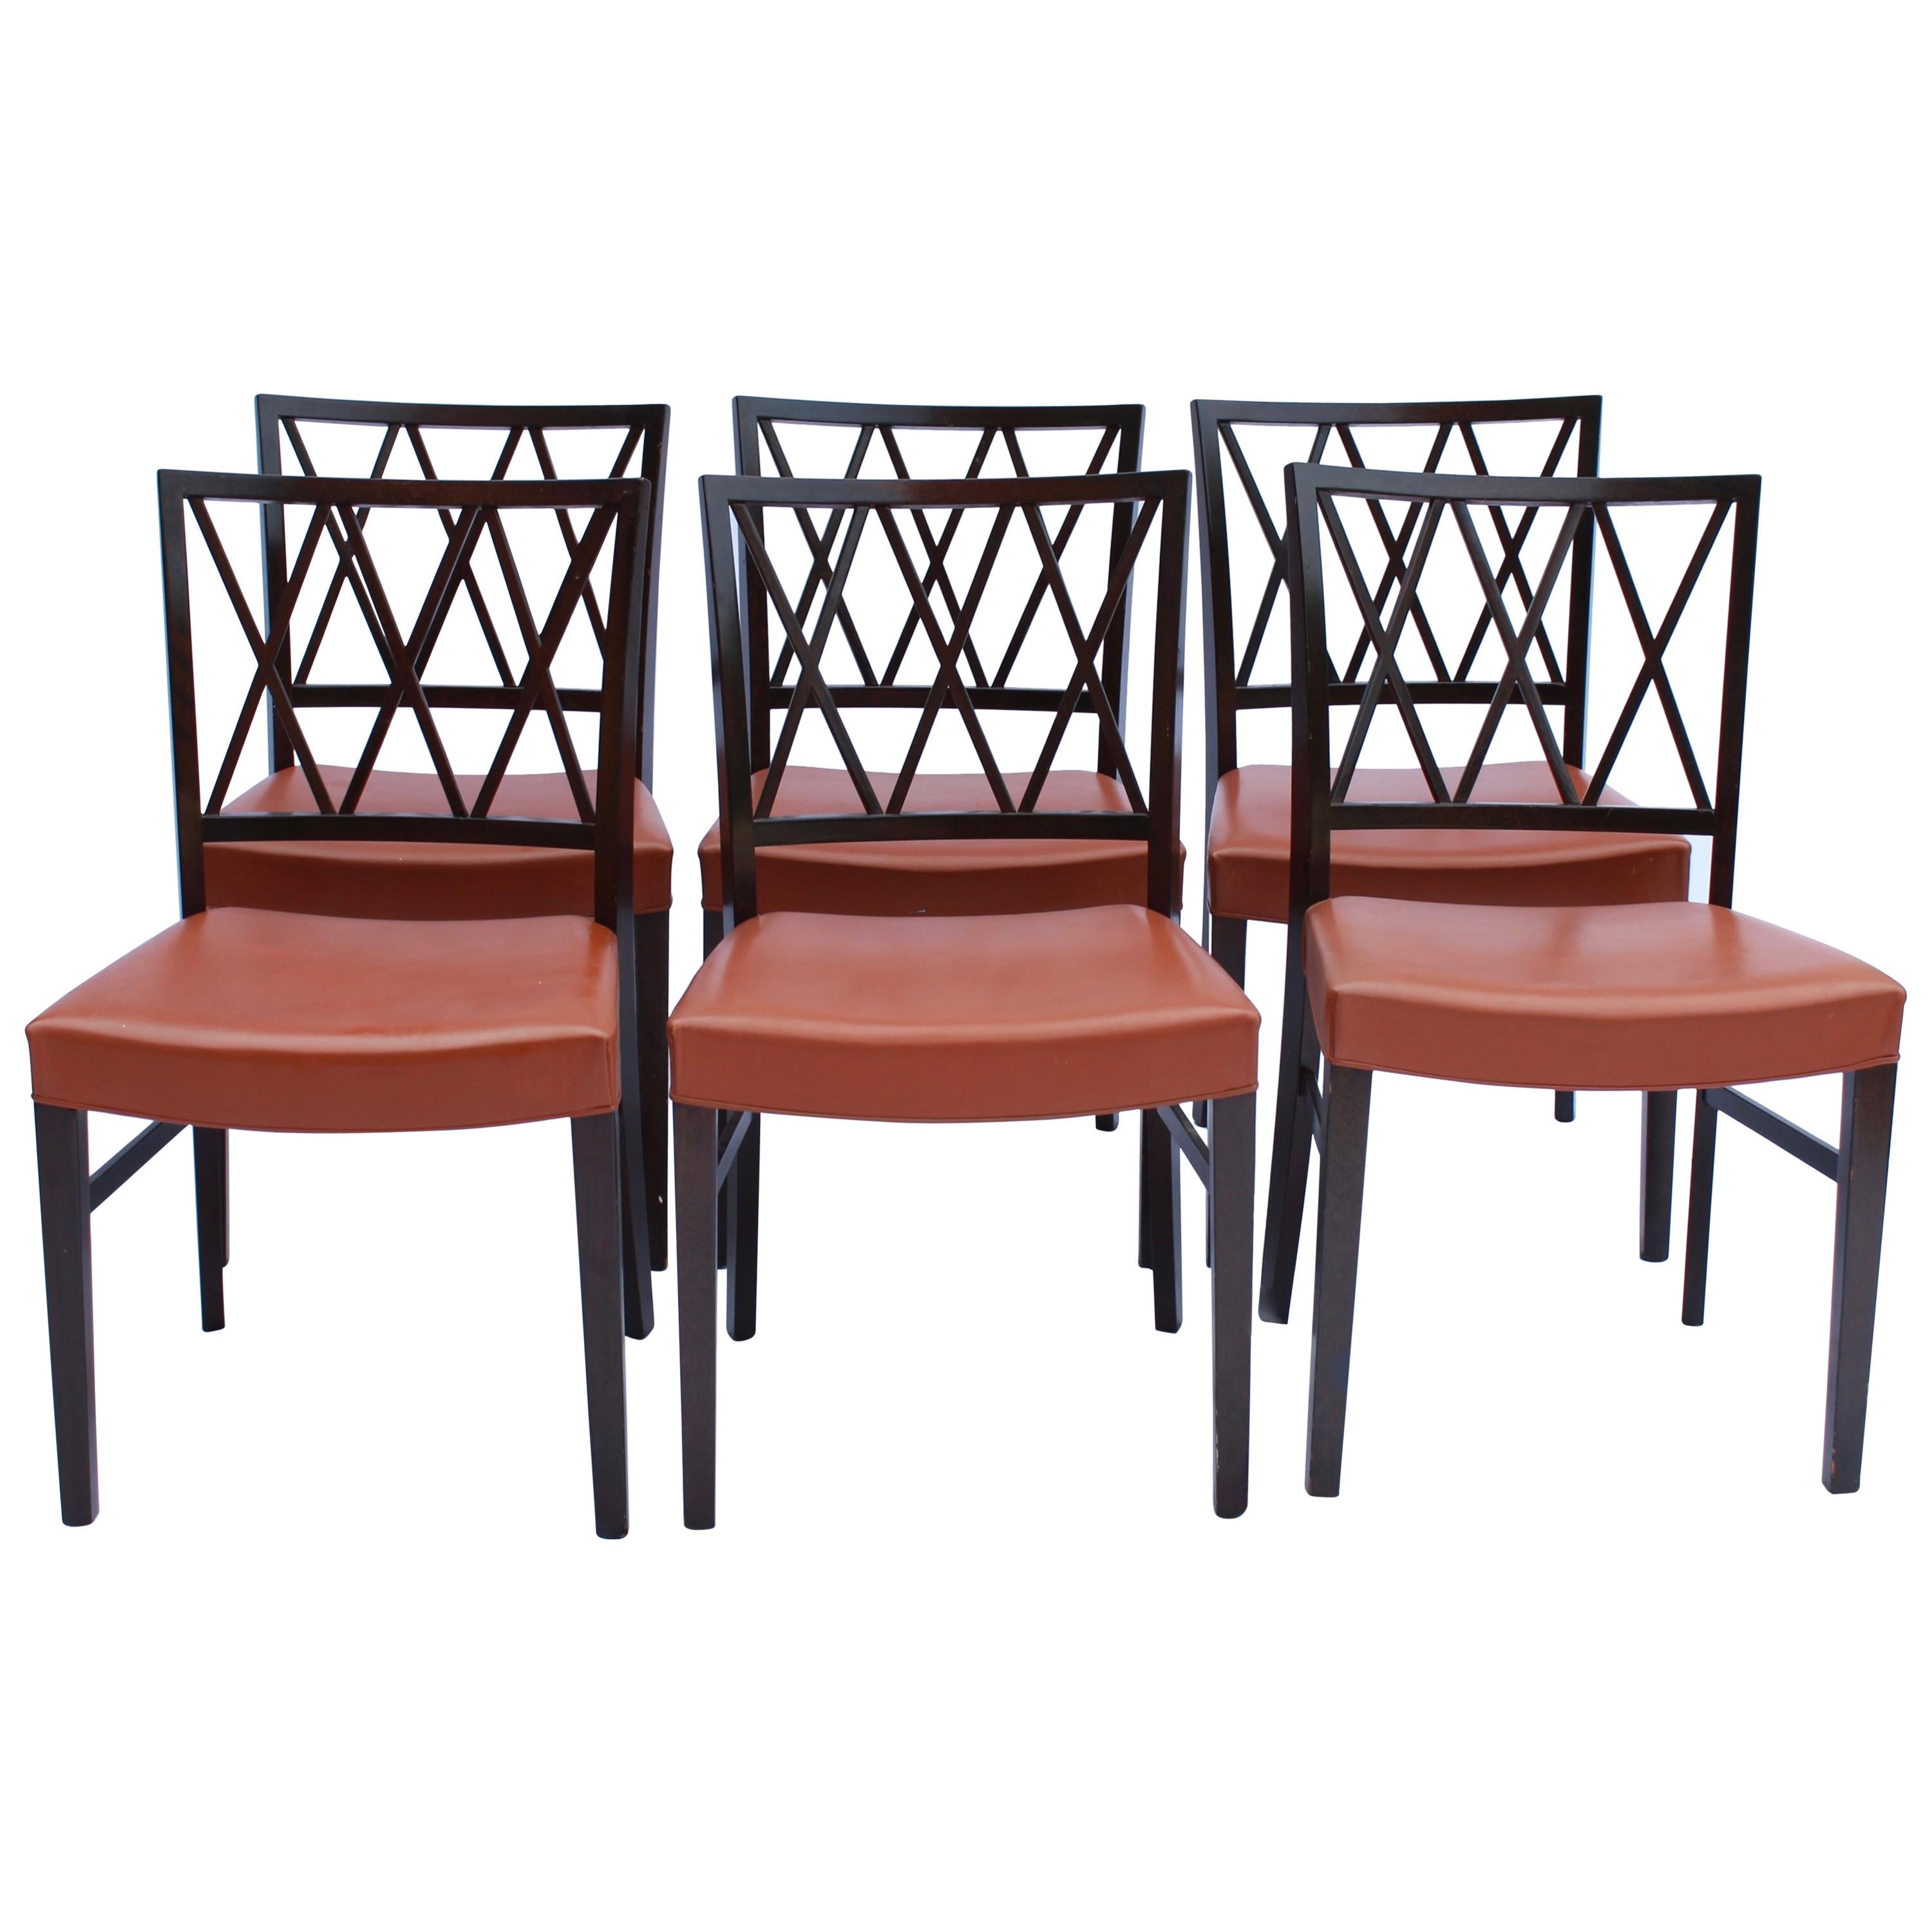 Set of 6 Dining Chairs in Dark Mahogany by Ole Wanscher, 1960s